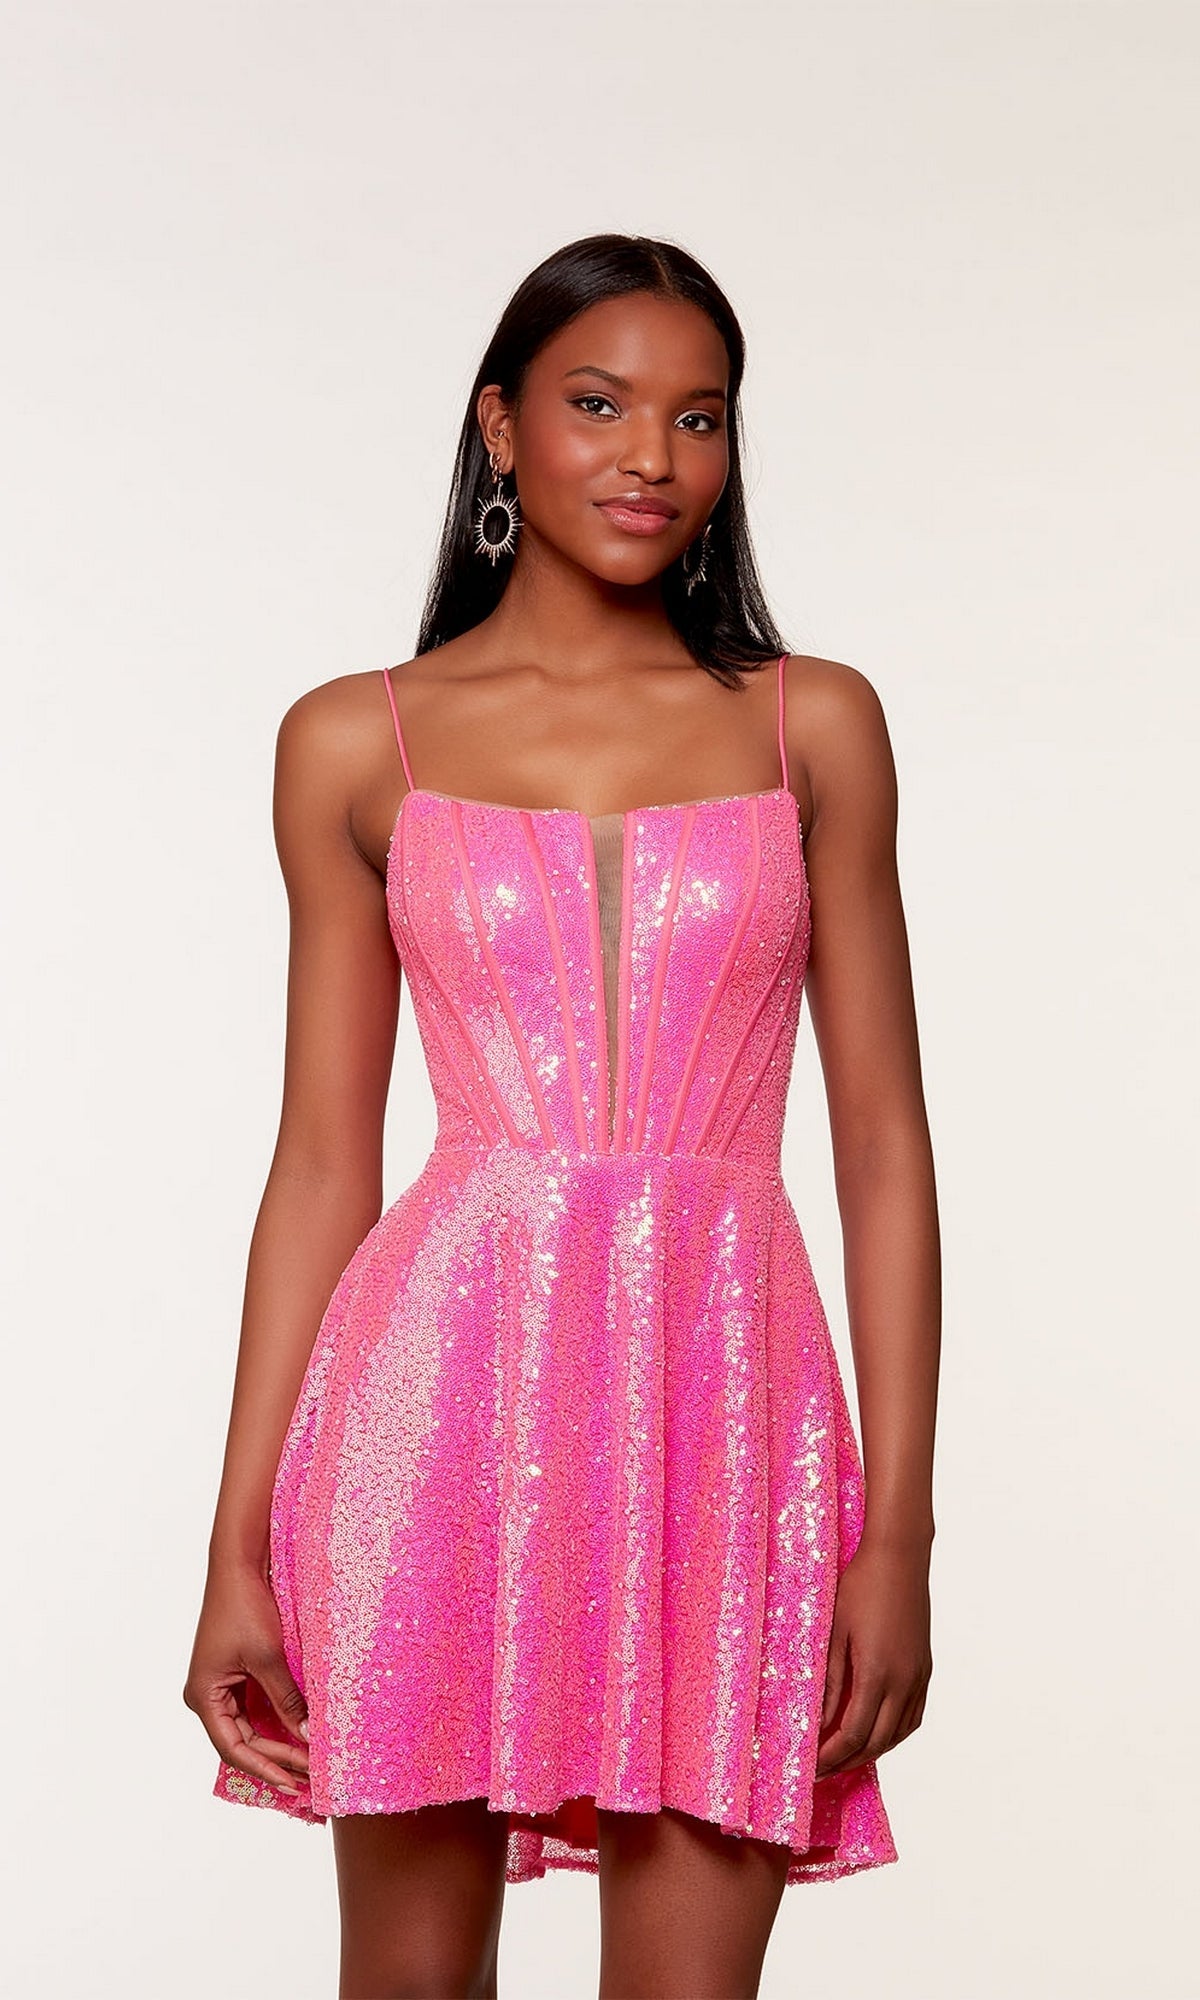 Neon Pink Short Dress By Alyce For Homecoming 3127